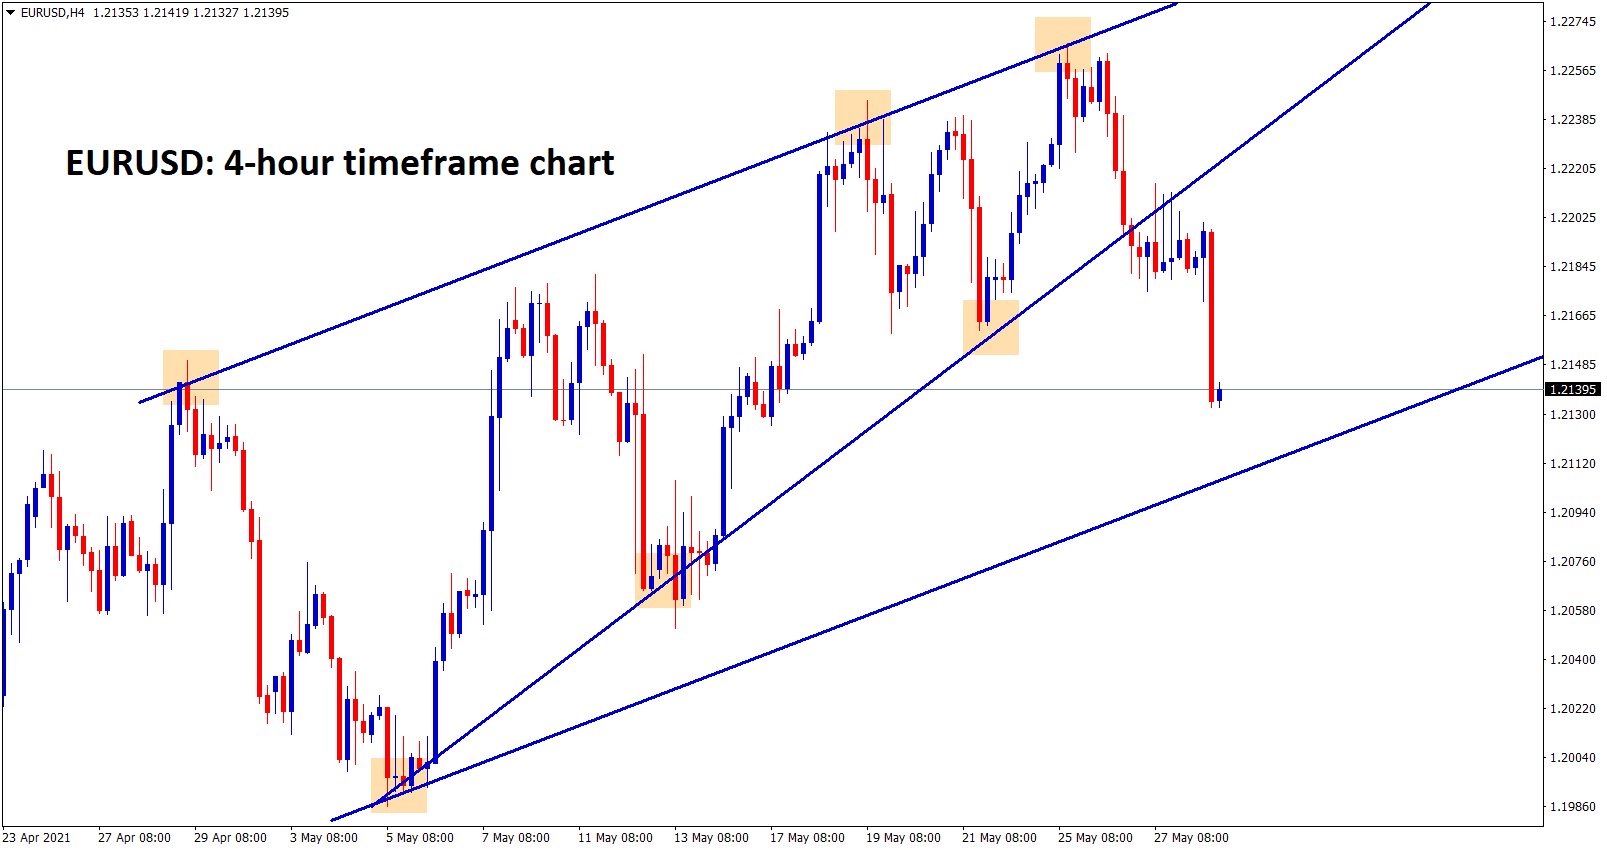 EURUSD has broken the rising wedge pattern but still moving in an Uptrend channel range